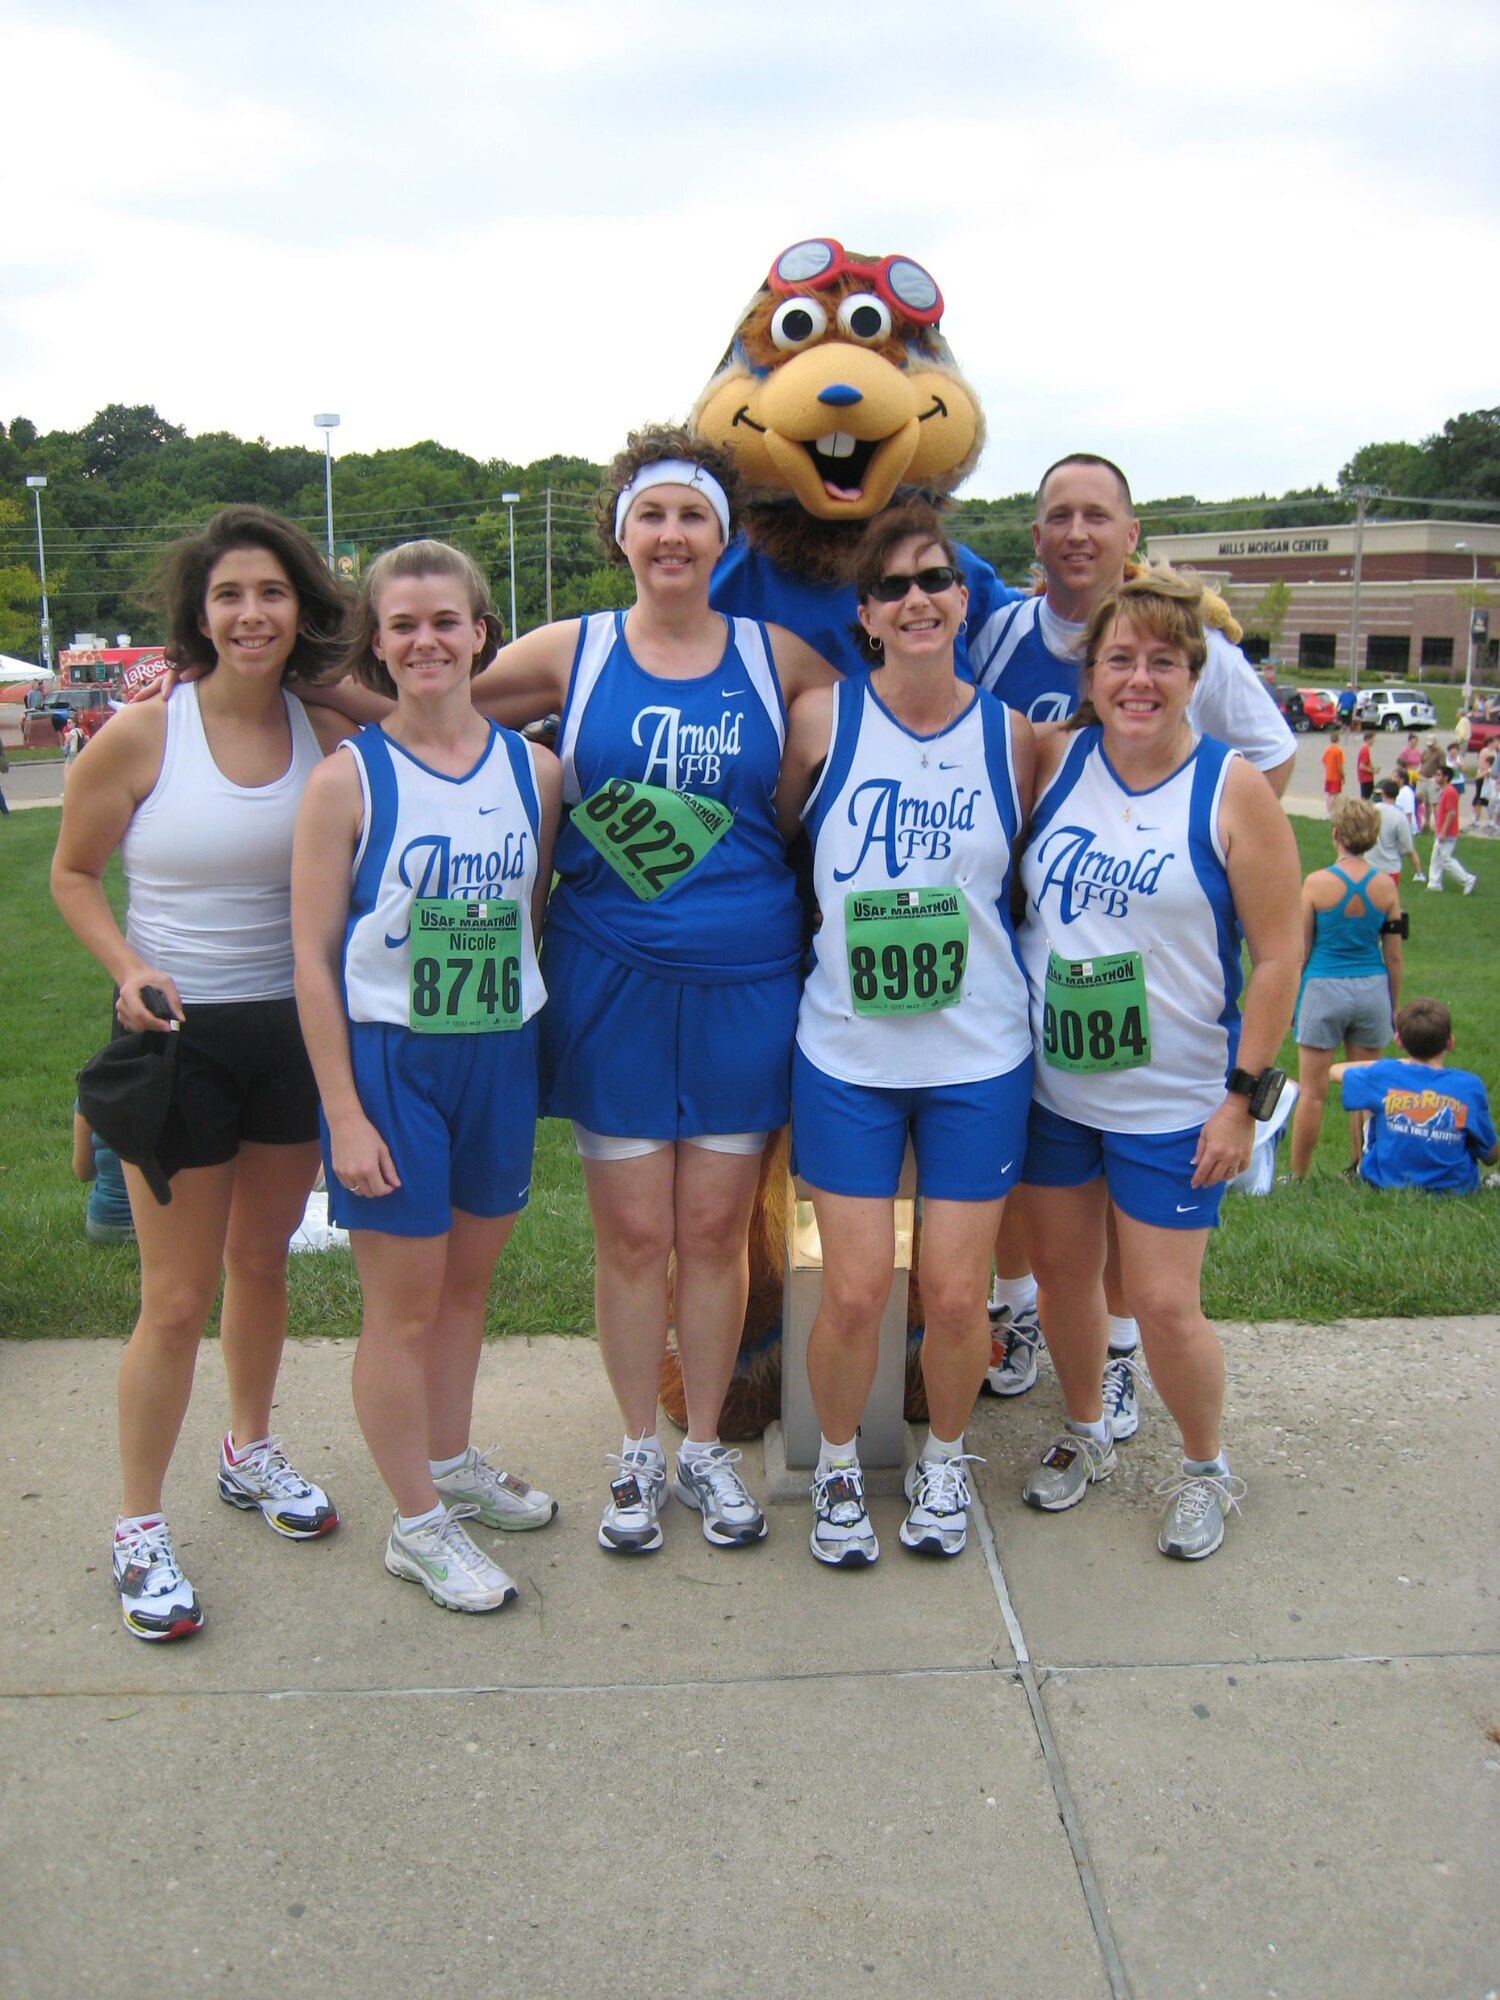 From left to right, Staff Sgt. Kimberly Jacbos, Nicki Rouser, Gloria Fairchild, Beth Huber, Capt. Eric Norton and Vicky Porter participated in the 11th annual Air Force Marathon. (Courtesy photo)